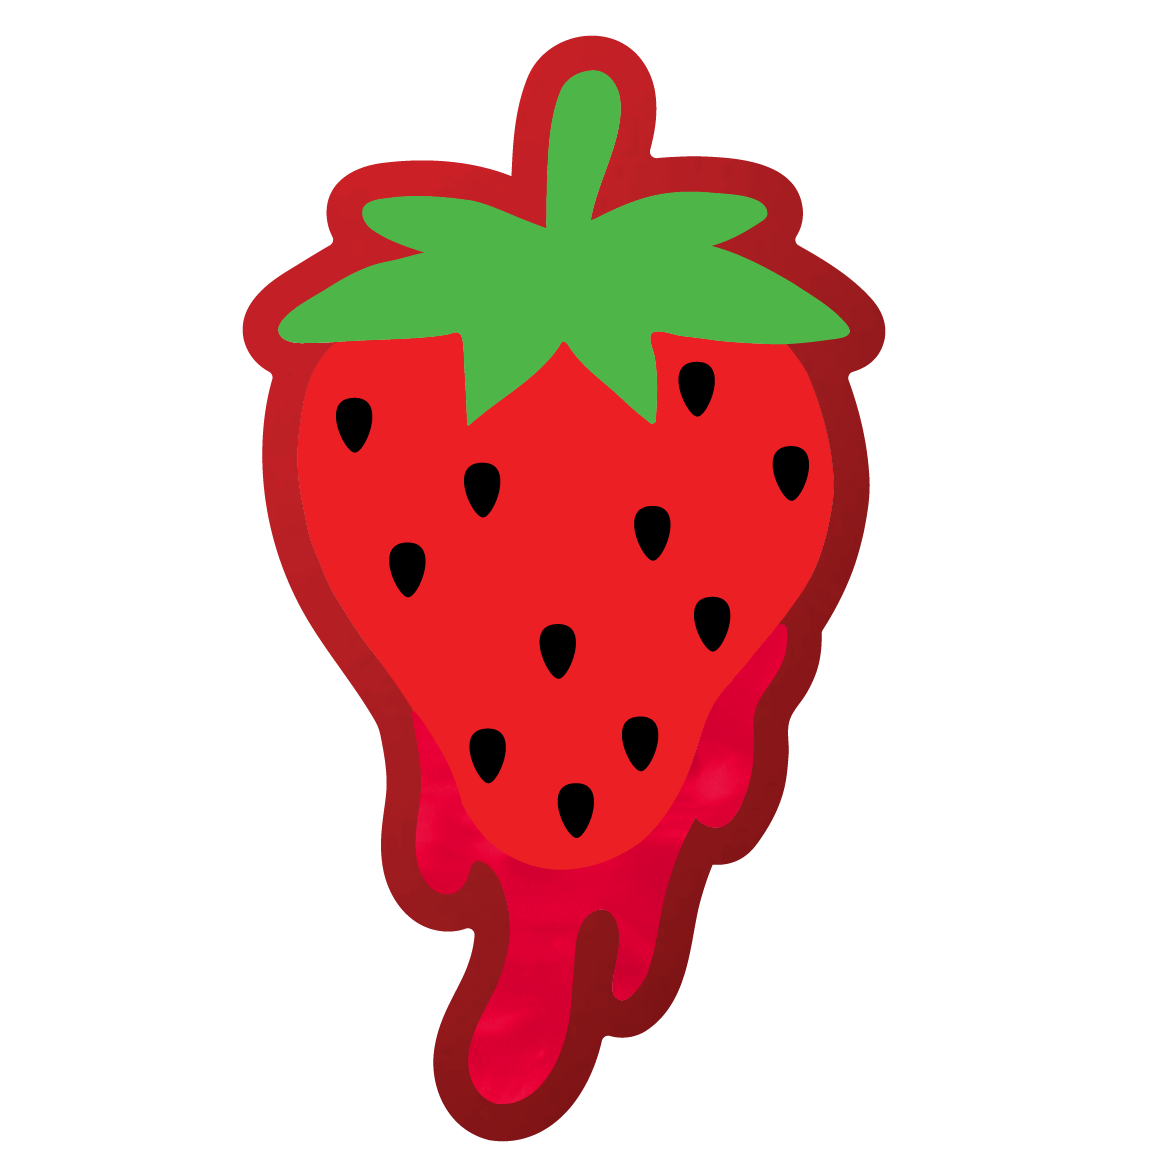 The Strawberry Wall Art